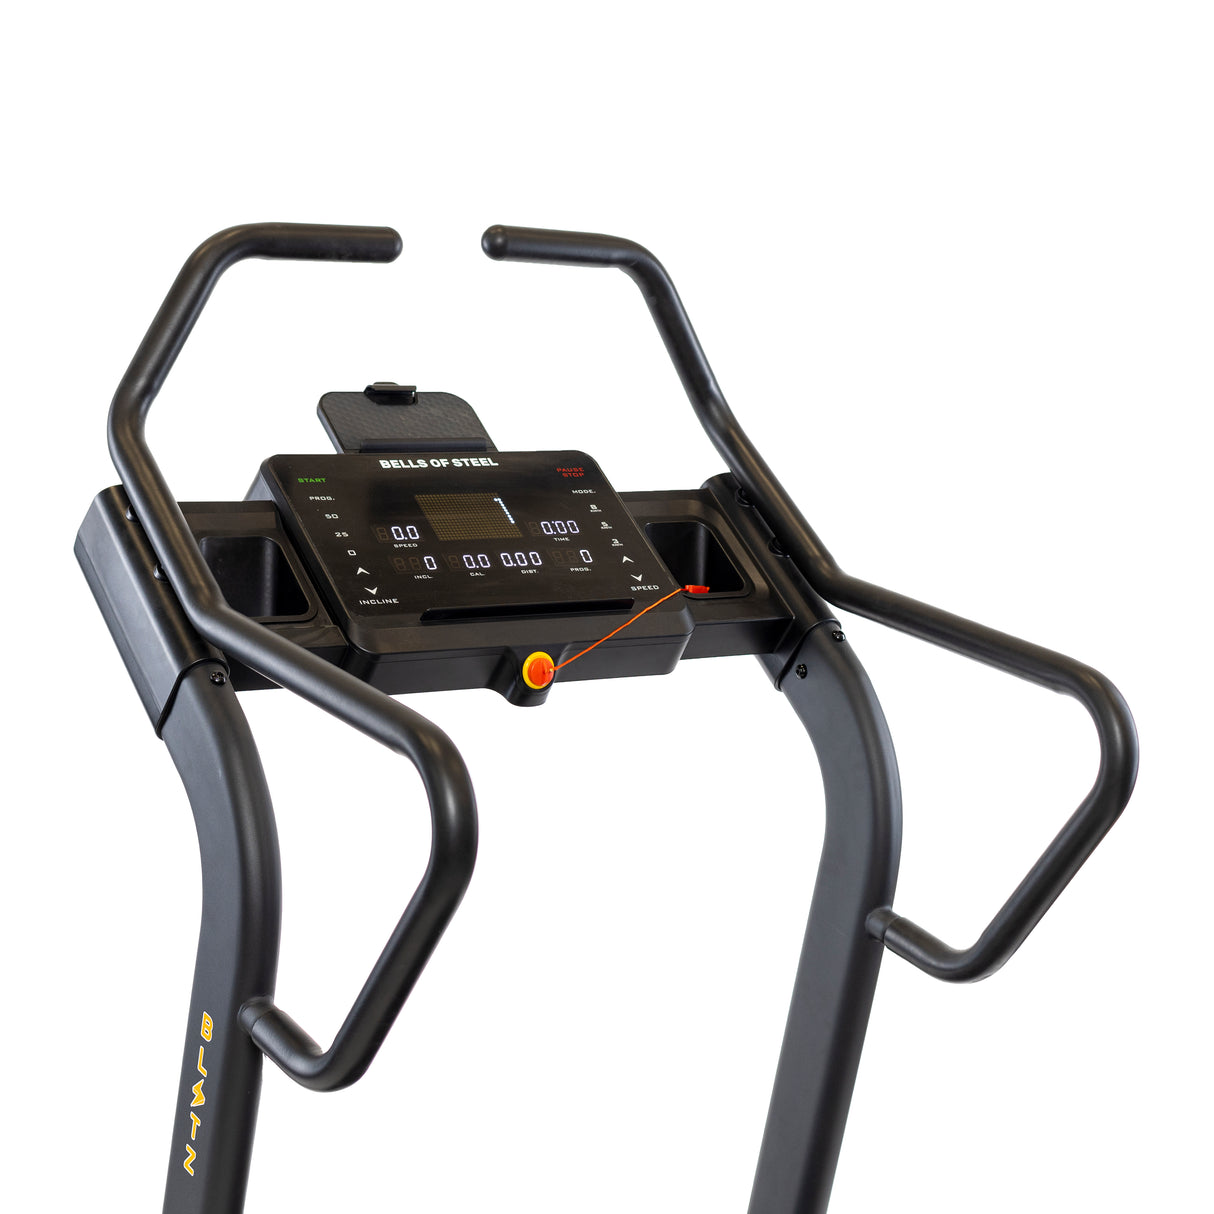 close up picture of the blitz mountain climber treadmill